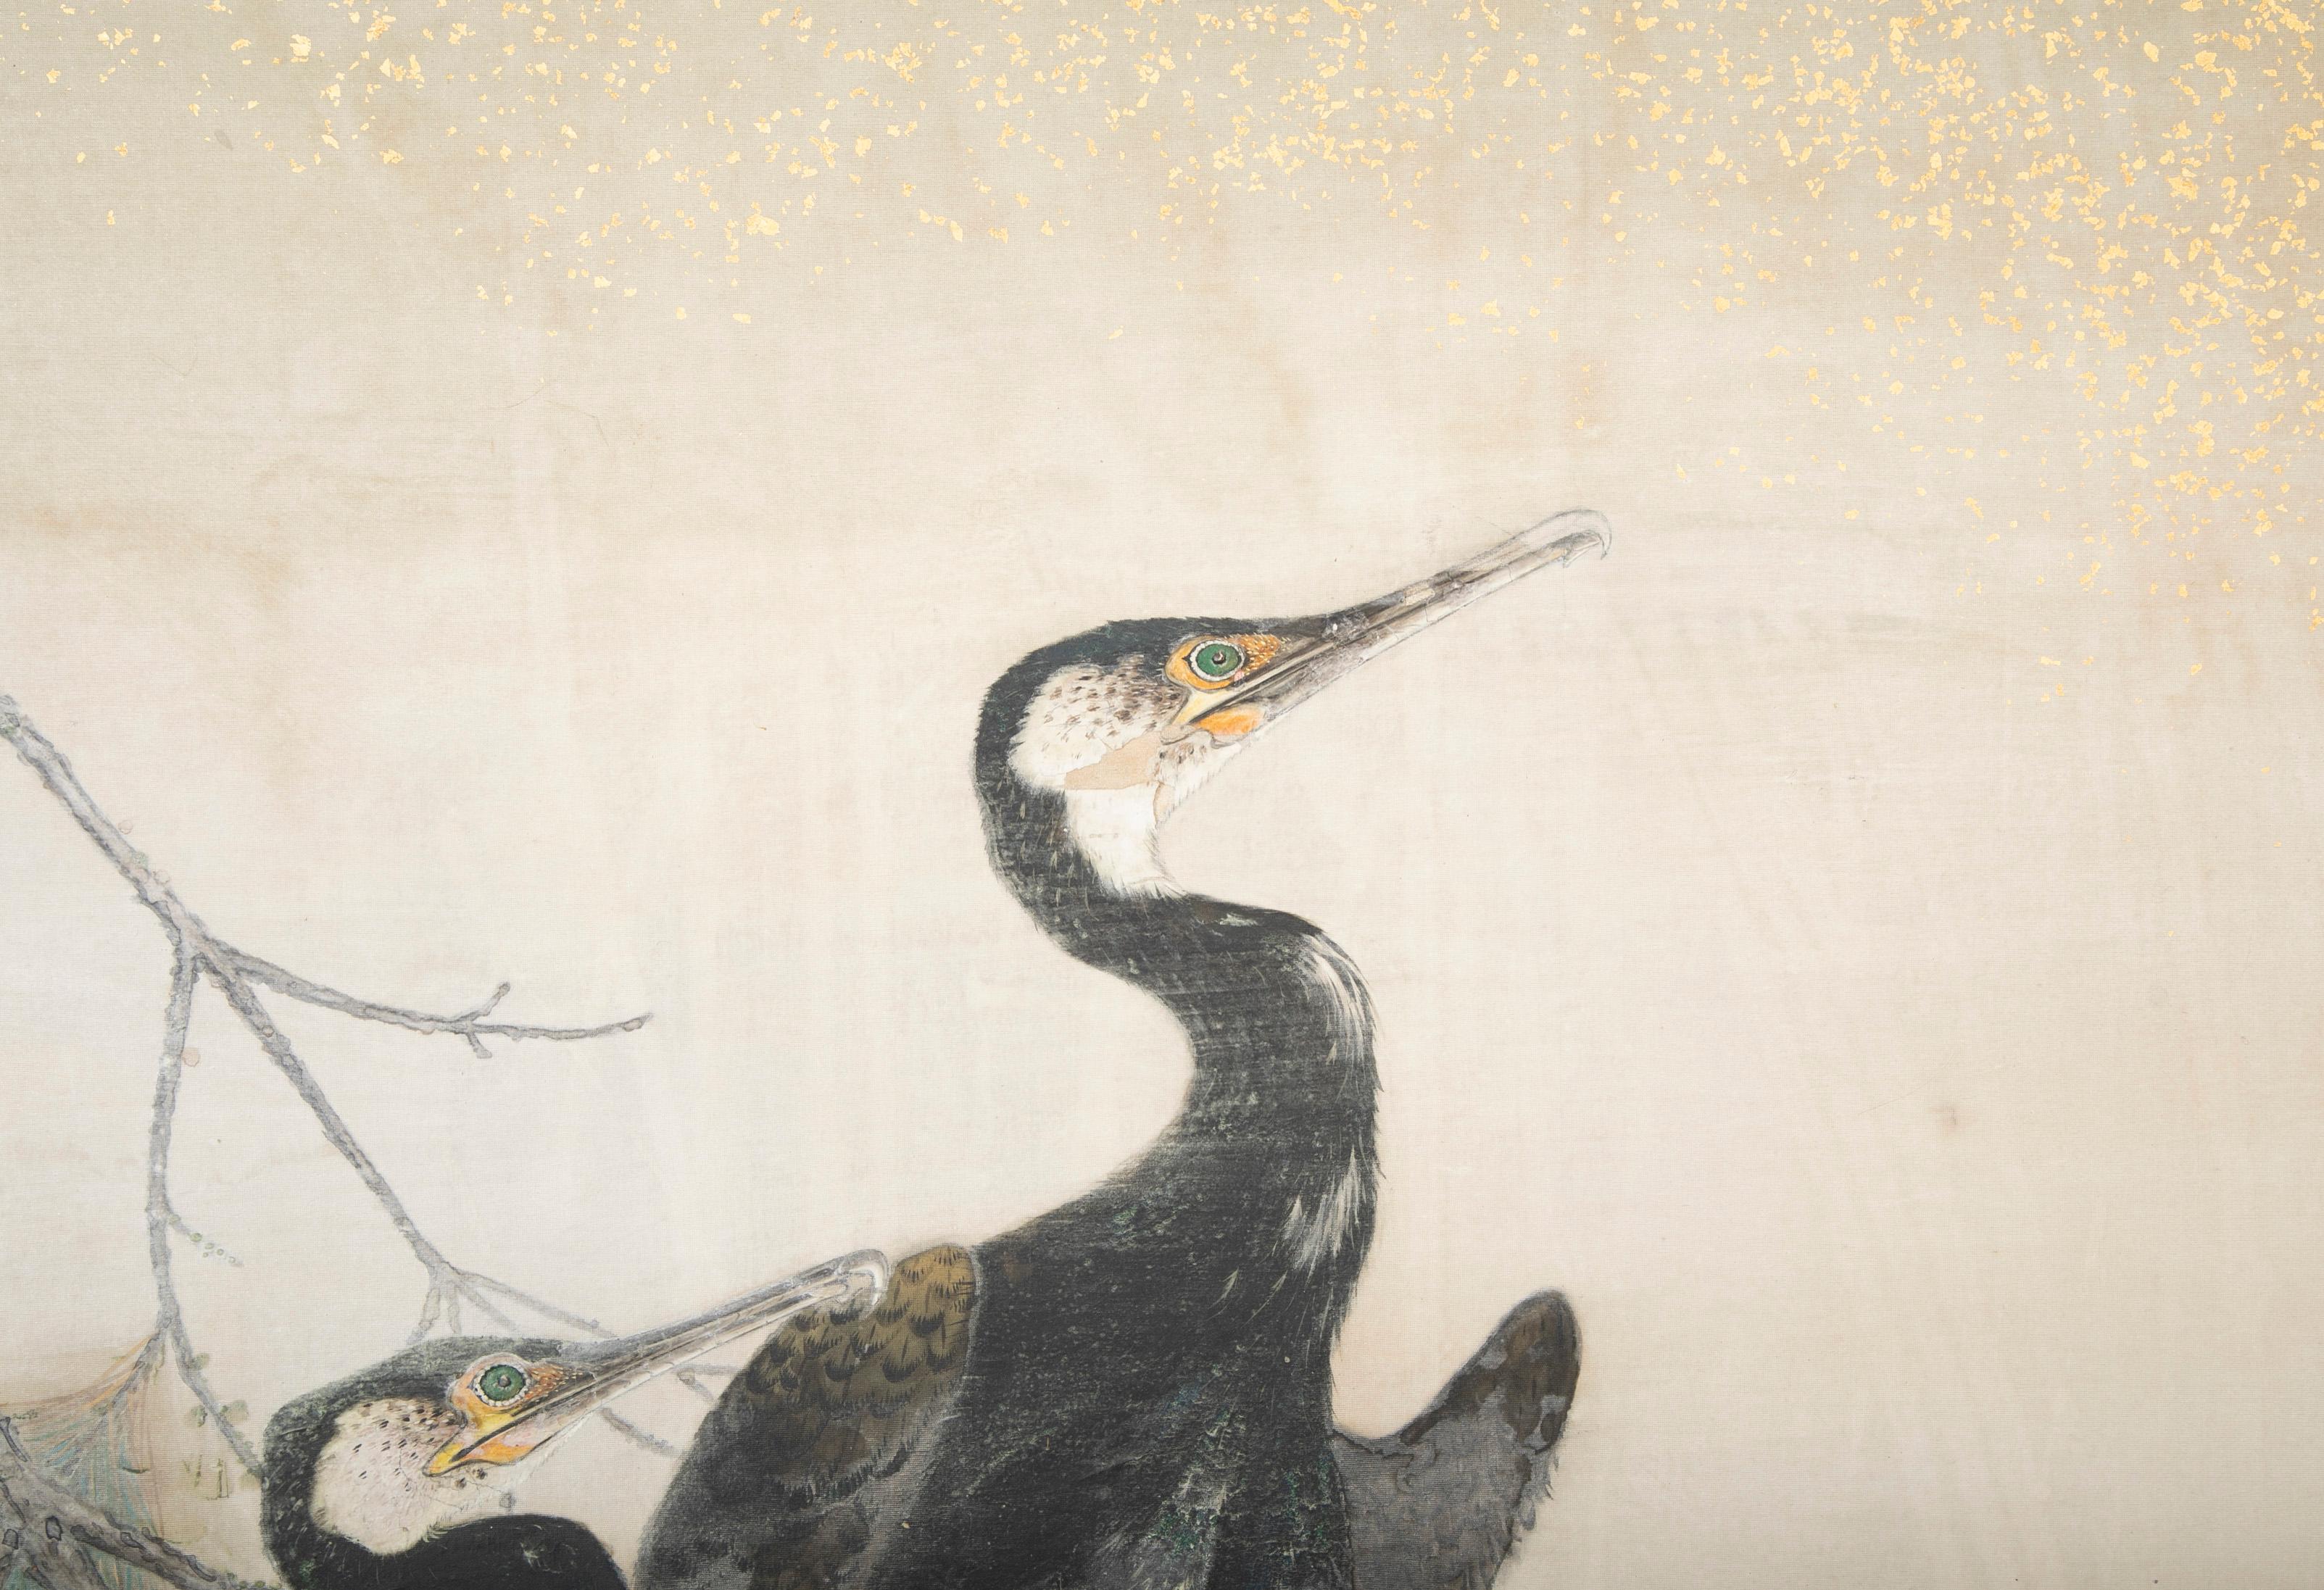 Taisho Period Painted Silk Screen Depicting Nesting Cormorants by Asami Joujou For Sale 6